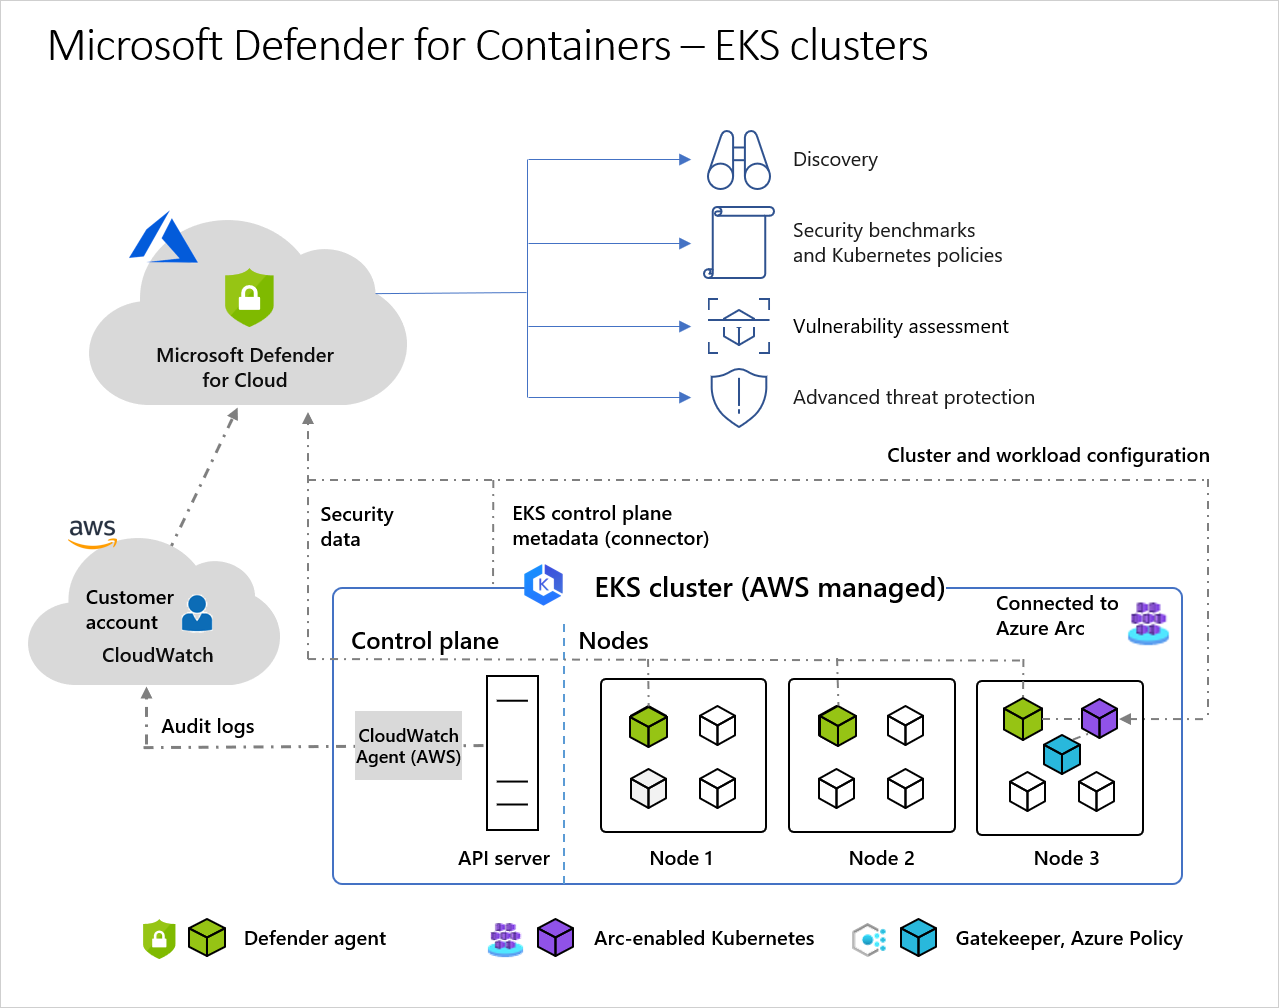 Diagram of high-level architecture of the interaction between Microsoft Defender for Containers, Amazon Web Services' EKS clusters, Azure Arc-enabled Kubernetes, and Azure Policy.